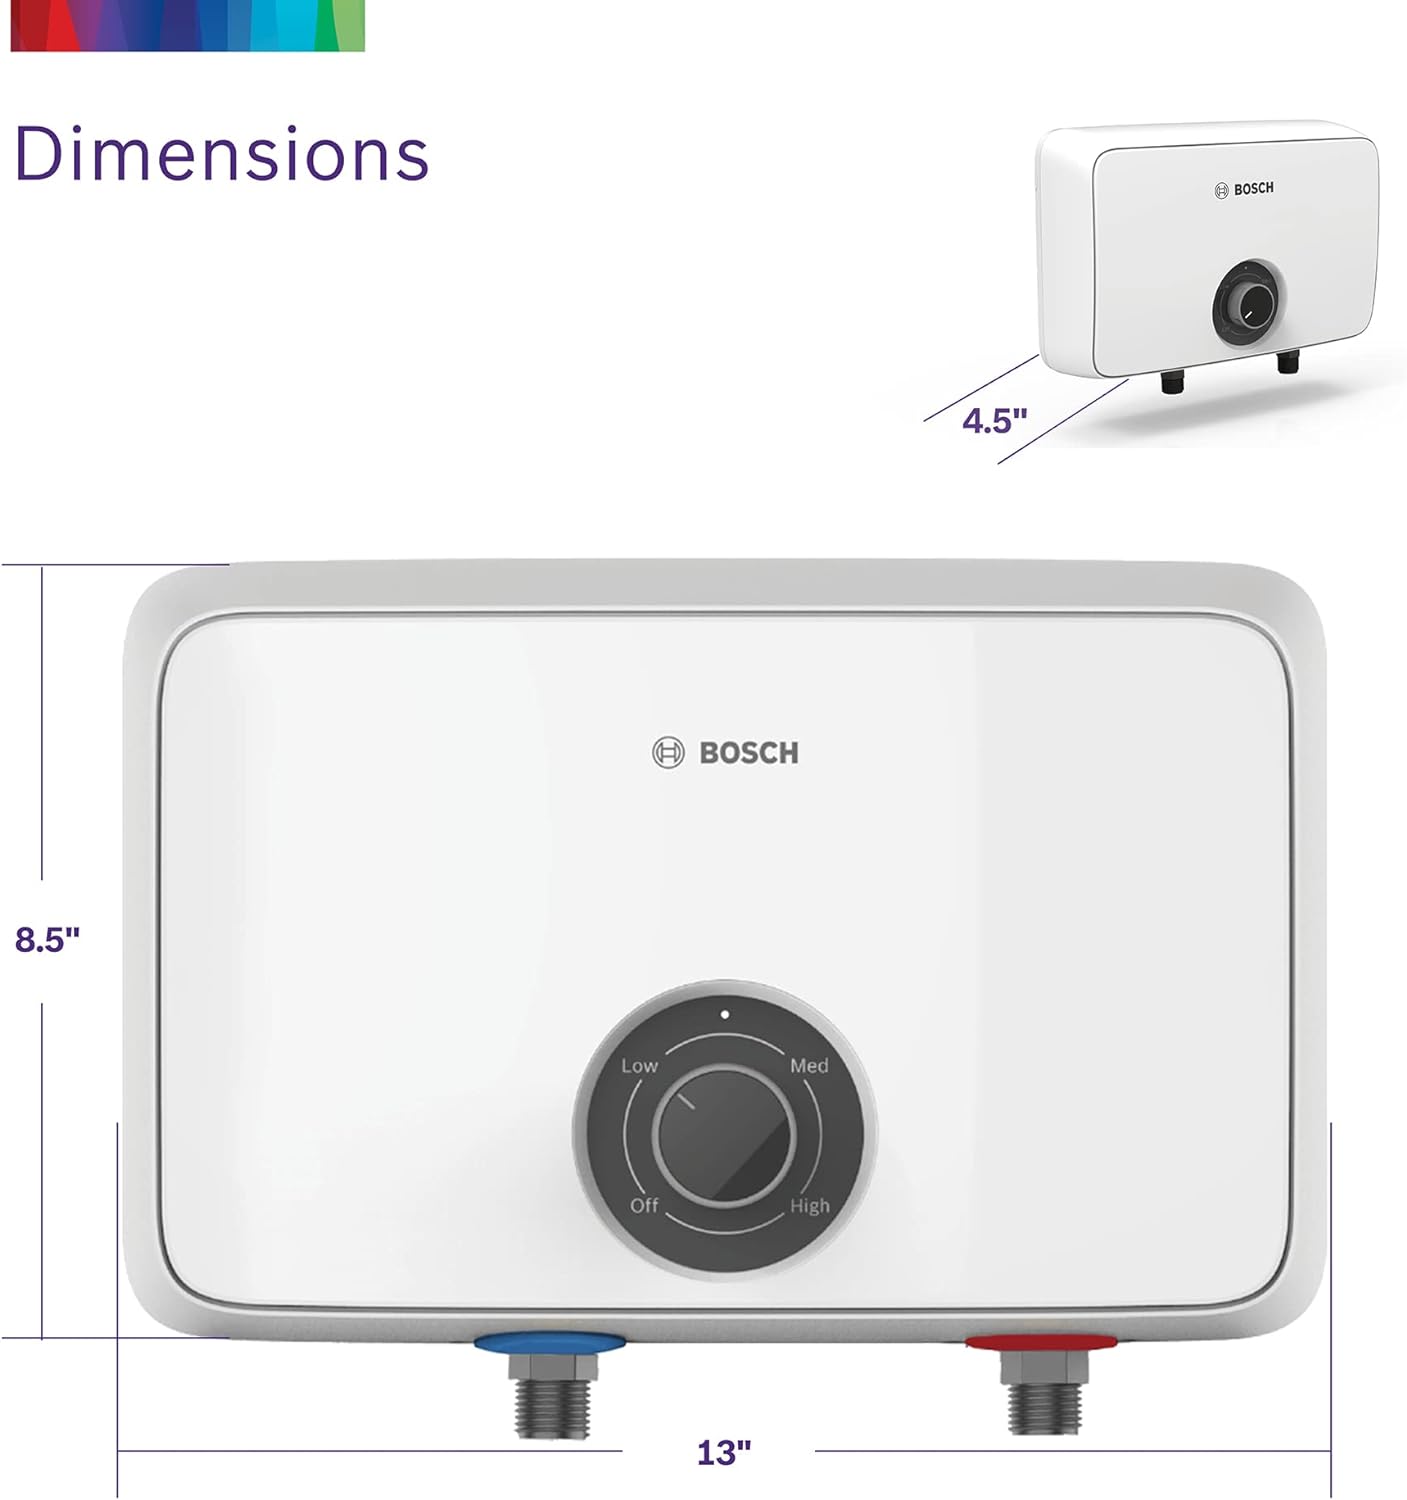 Bosch Tankless Water Heater dimensions